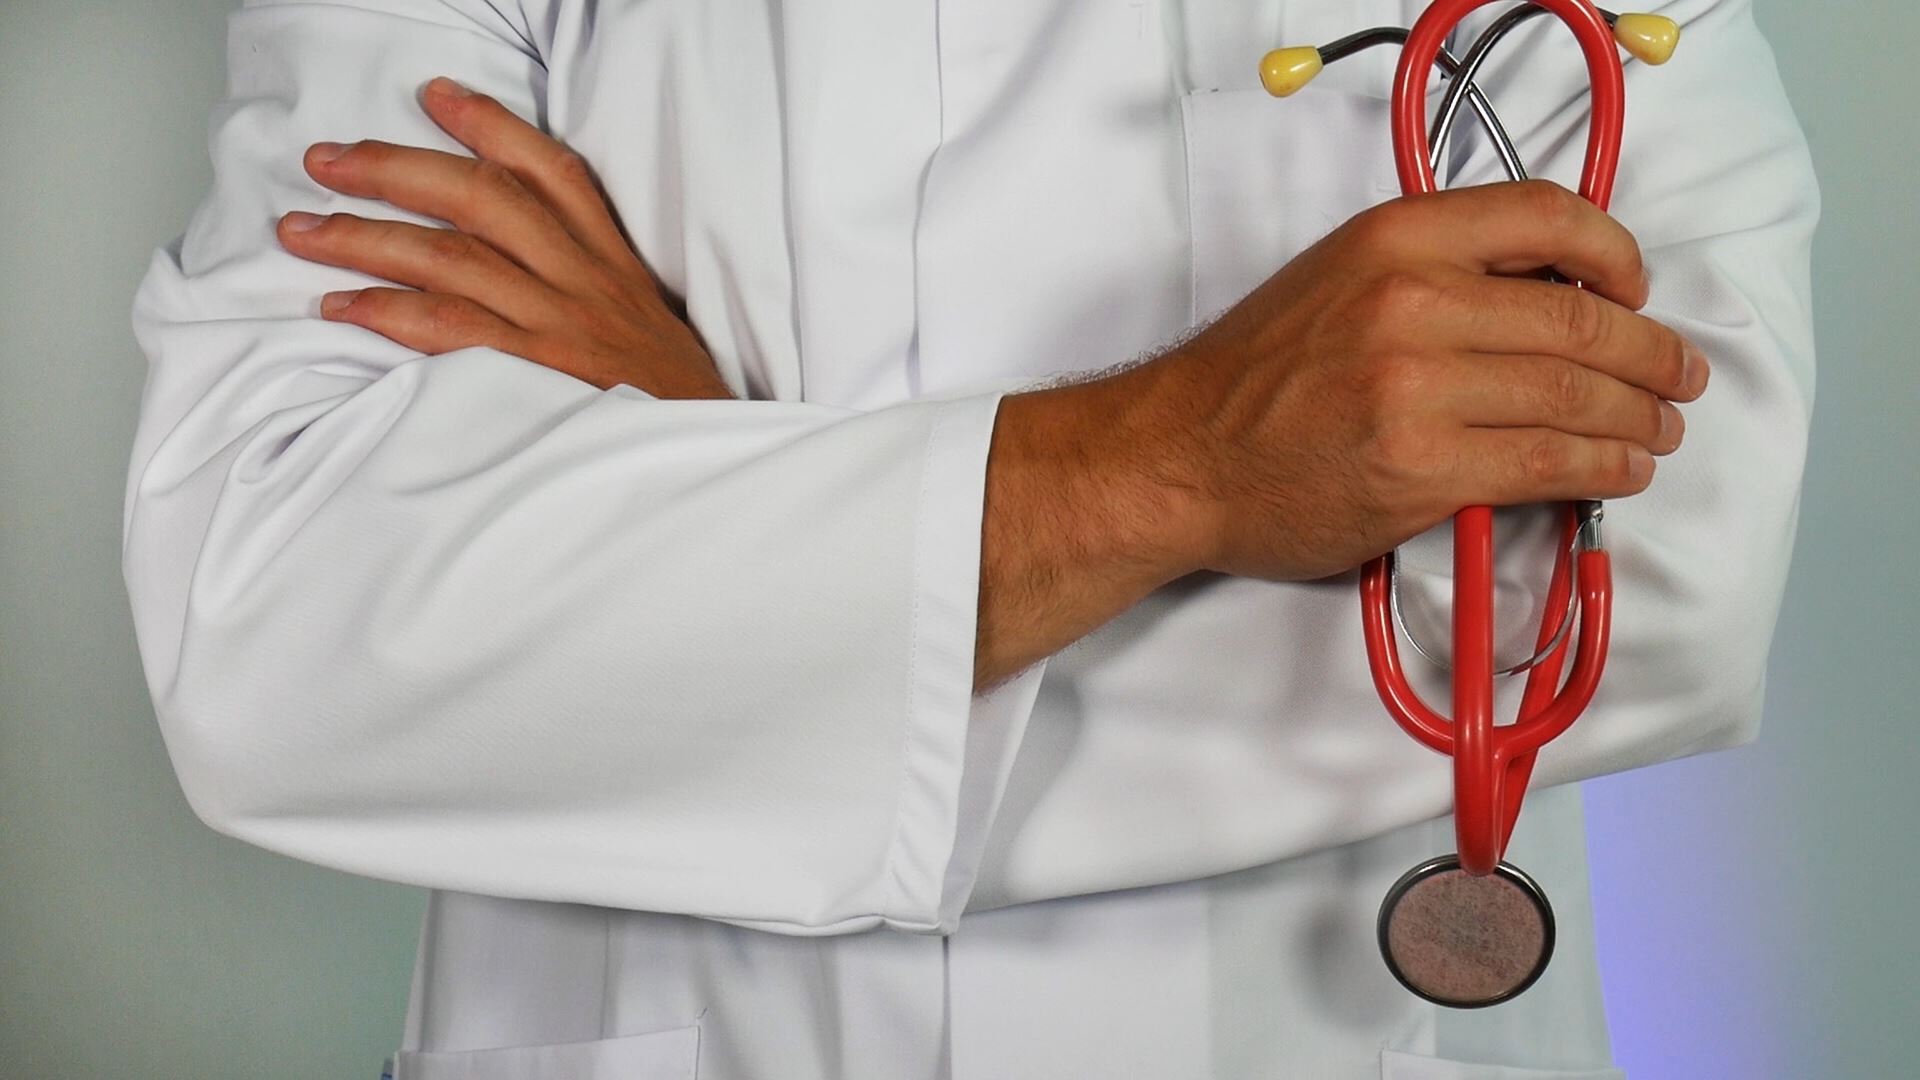 A person wearing a white coat holding a red stethoscope